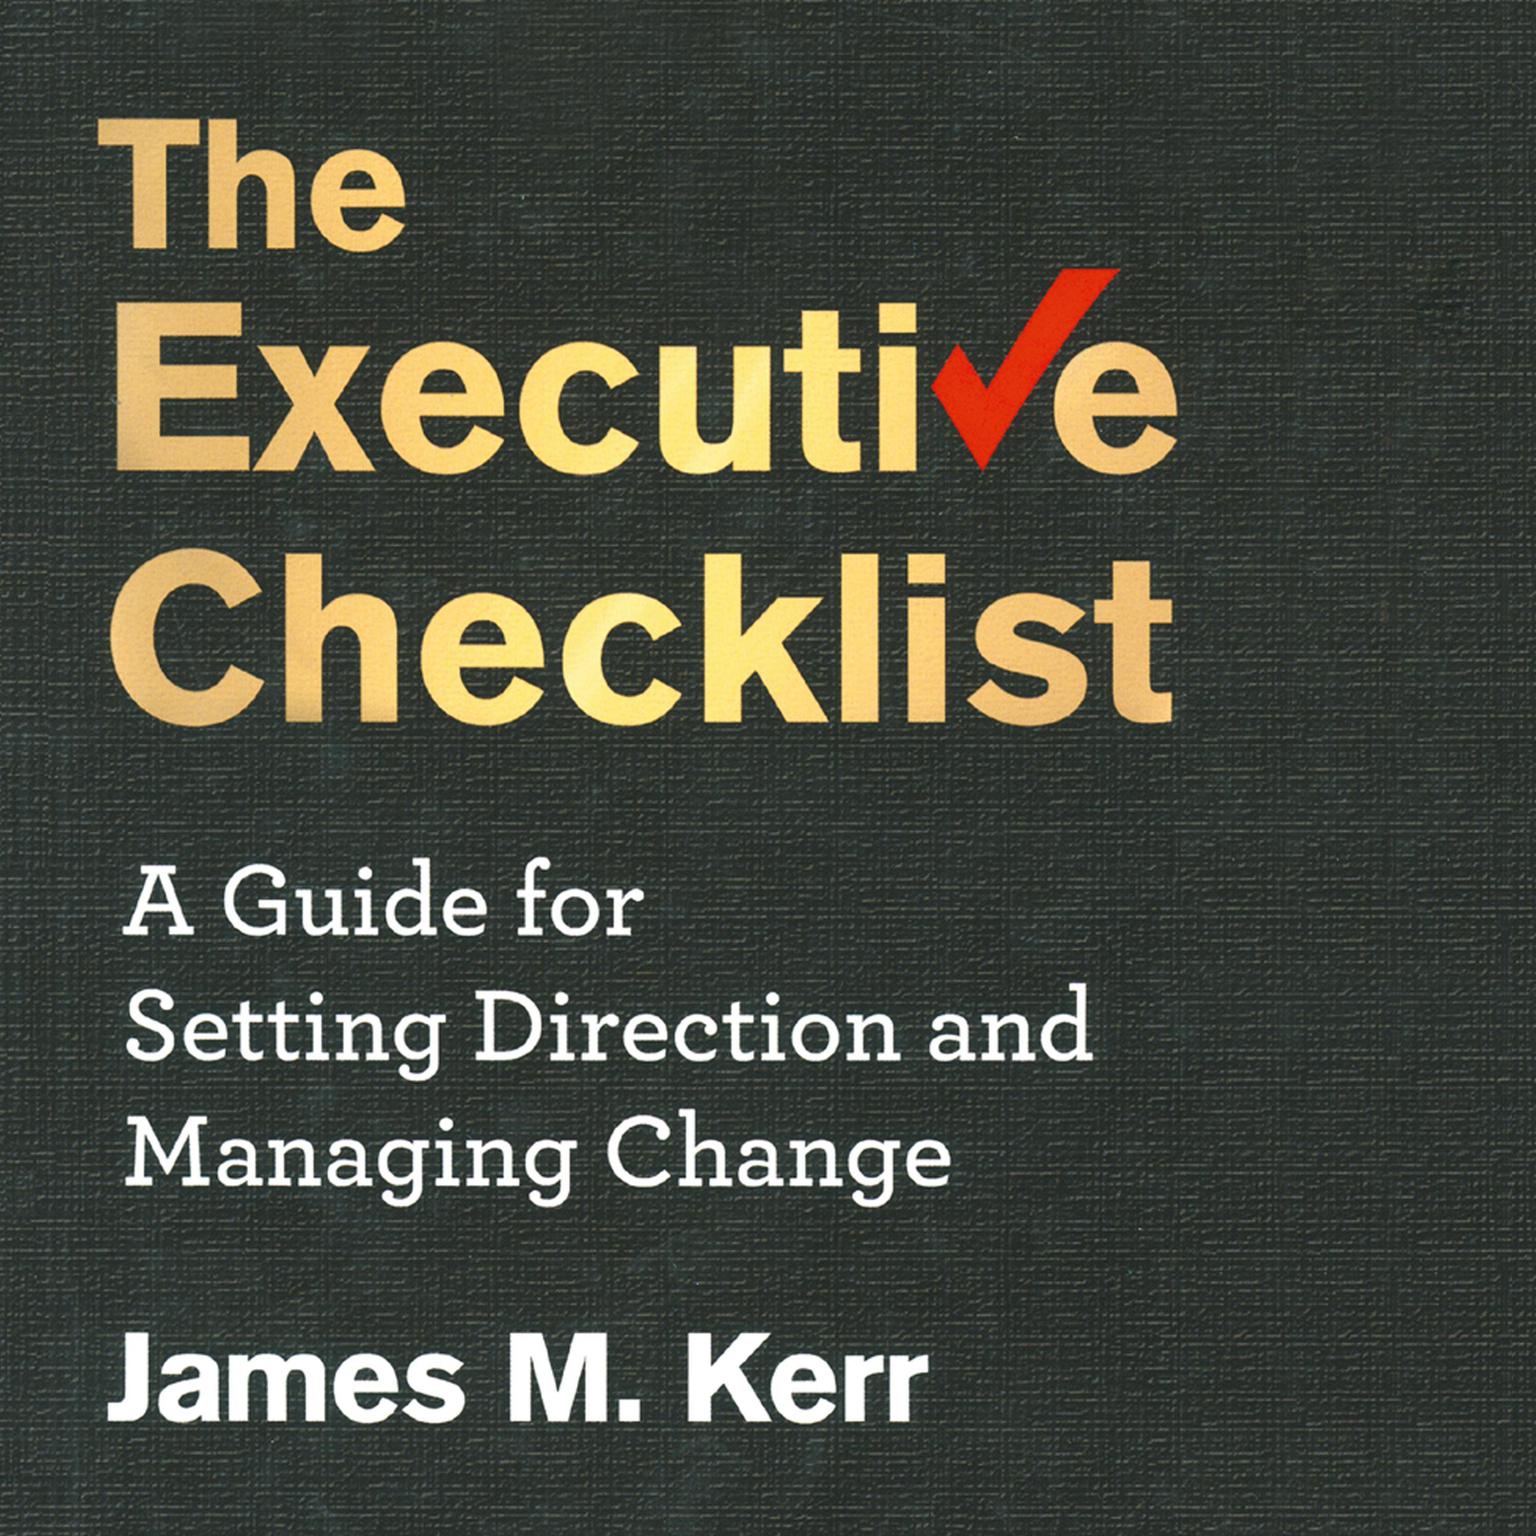 The Executive Checklist: A Guide for Setting Direction and Managing Change Audiobook, by James M. Kerr